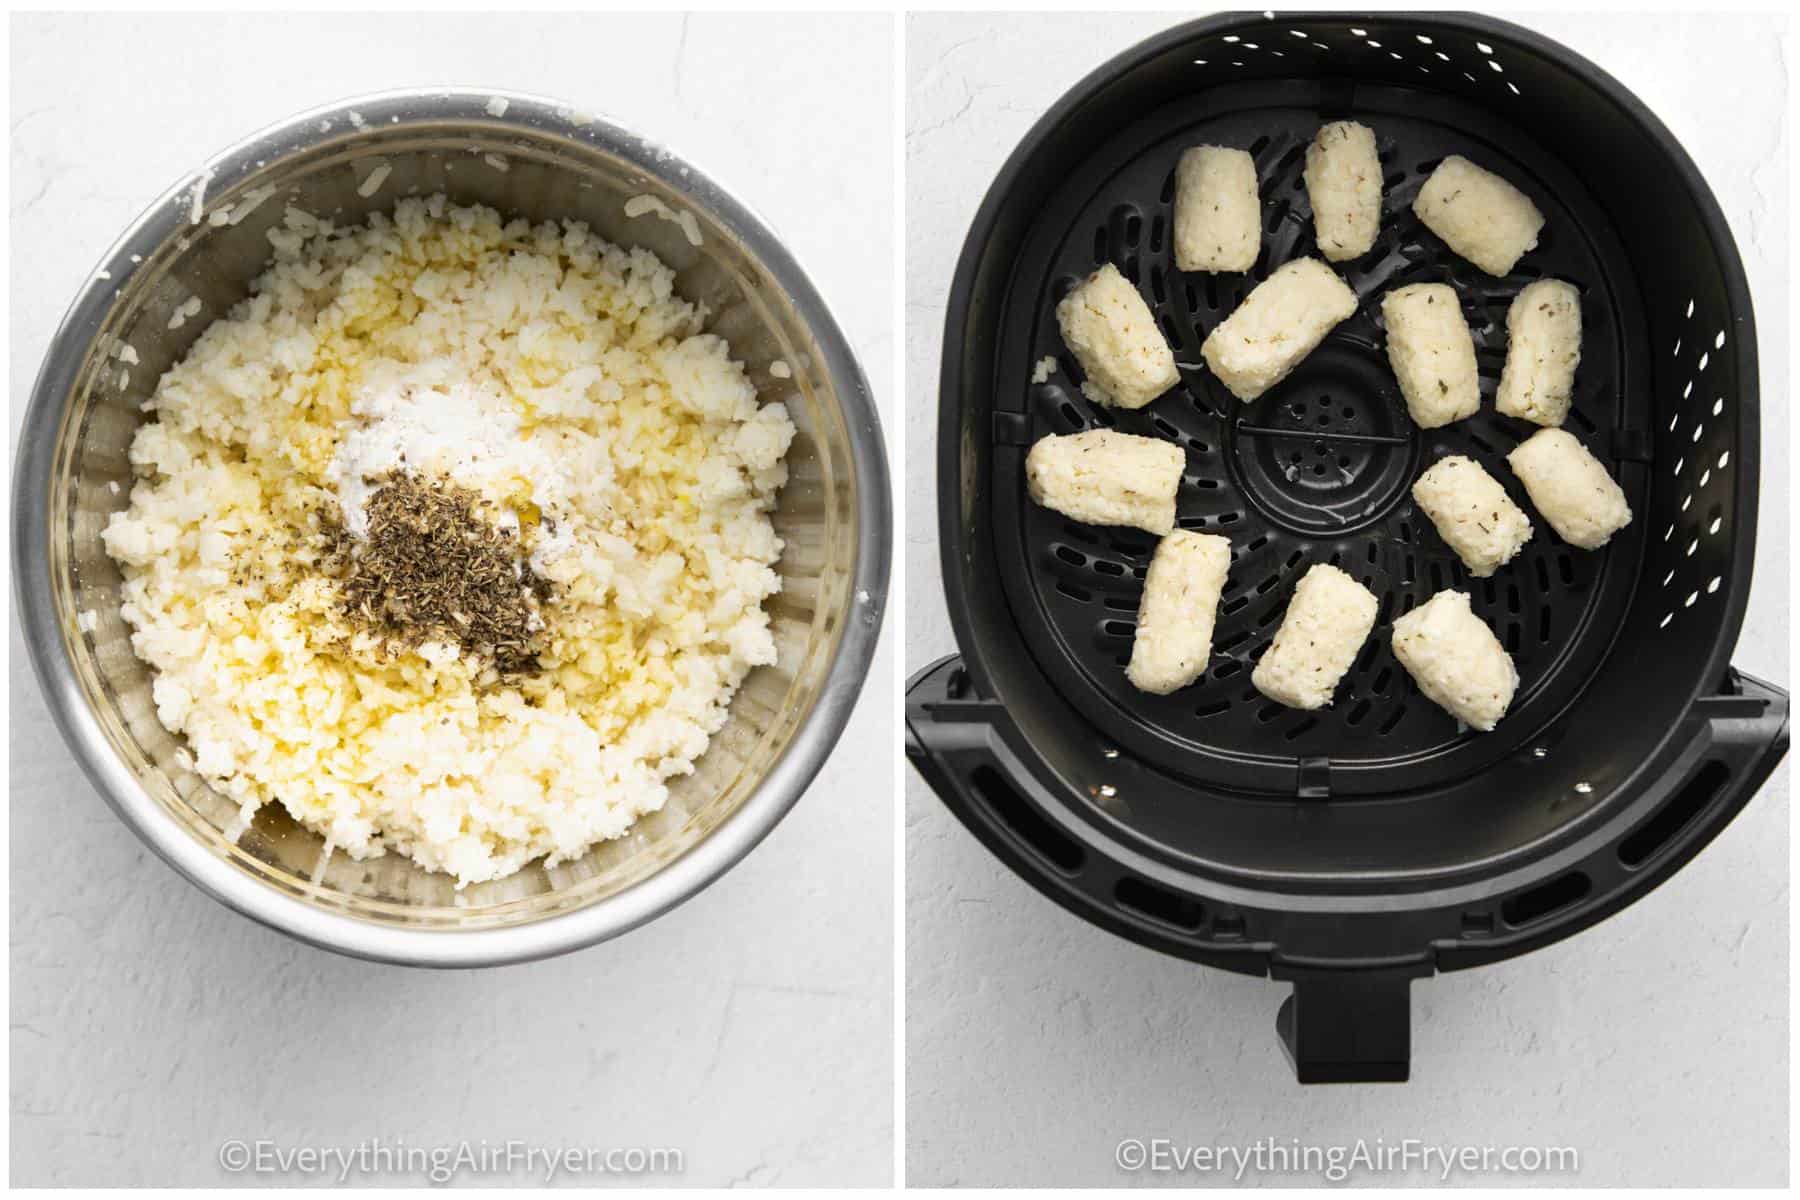 process of adding Homemade Air Fryer Tater Tots to fryer